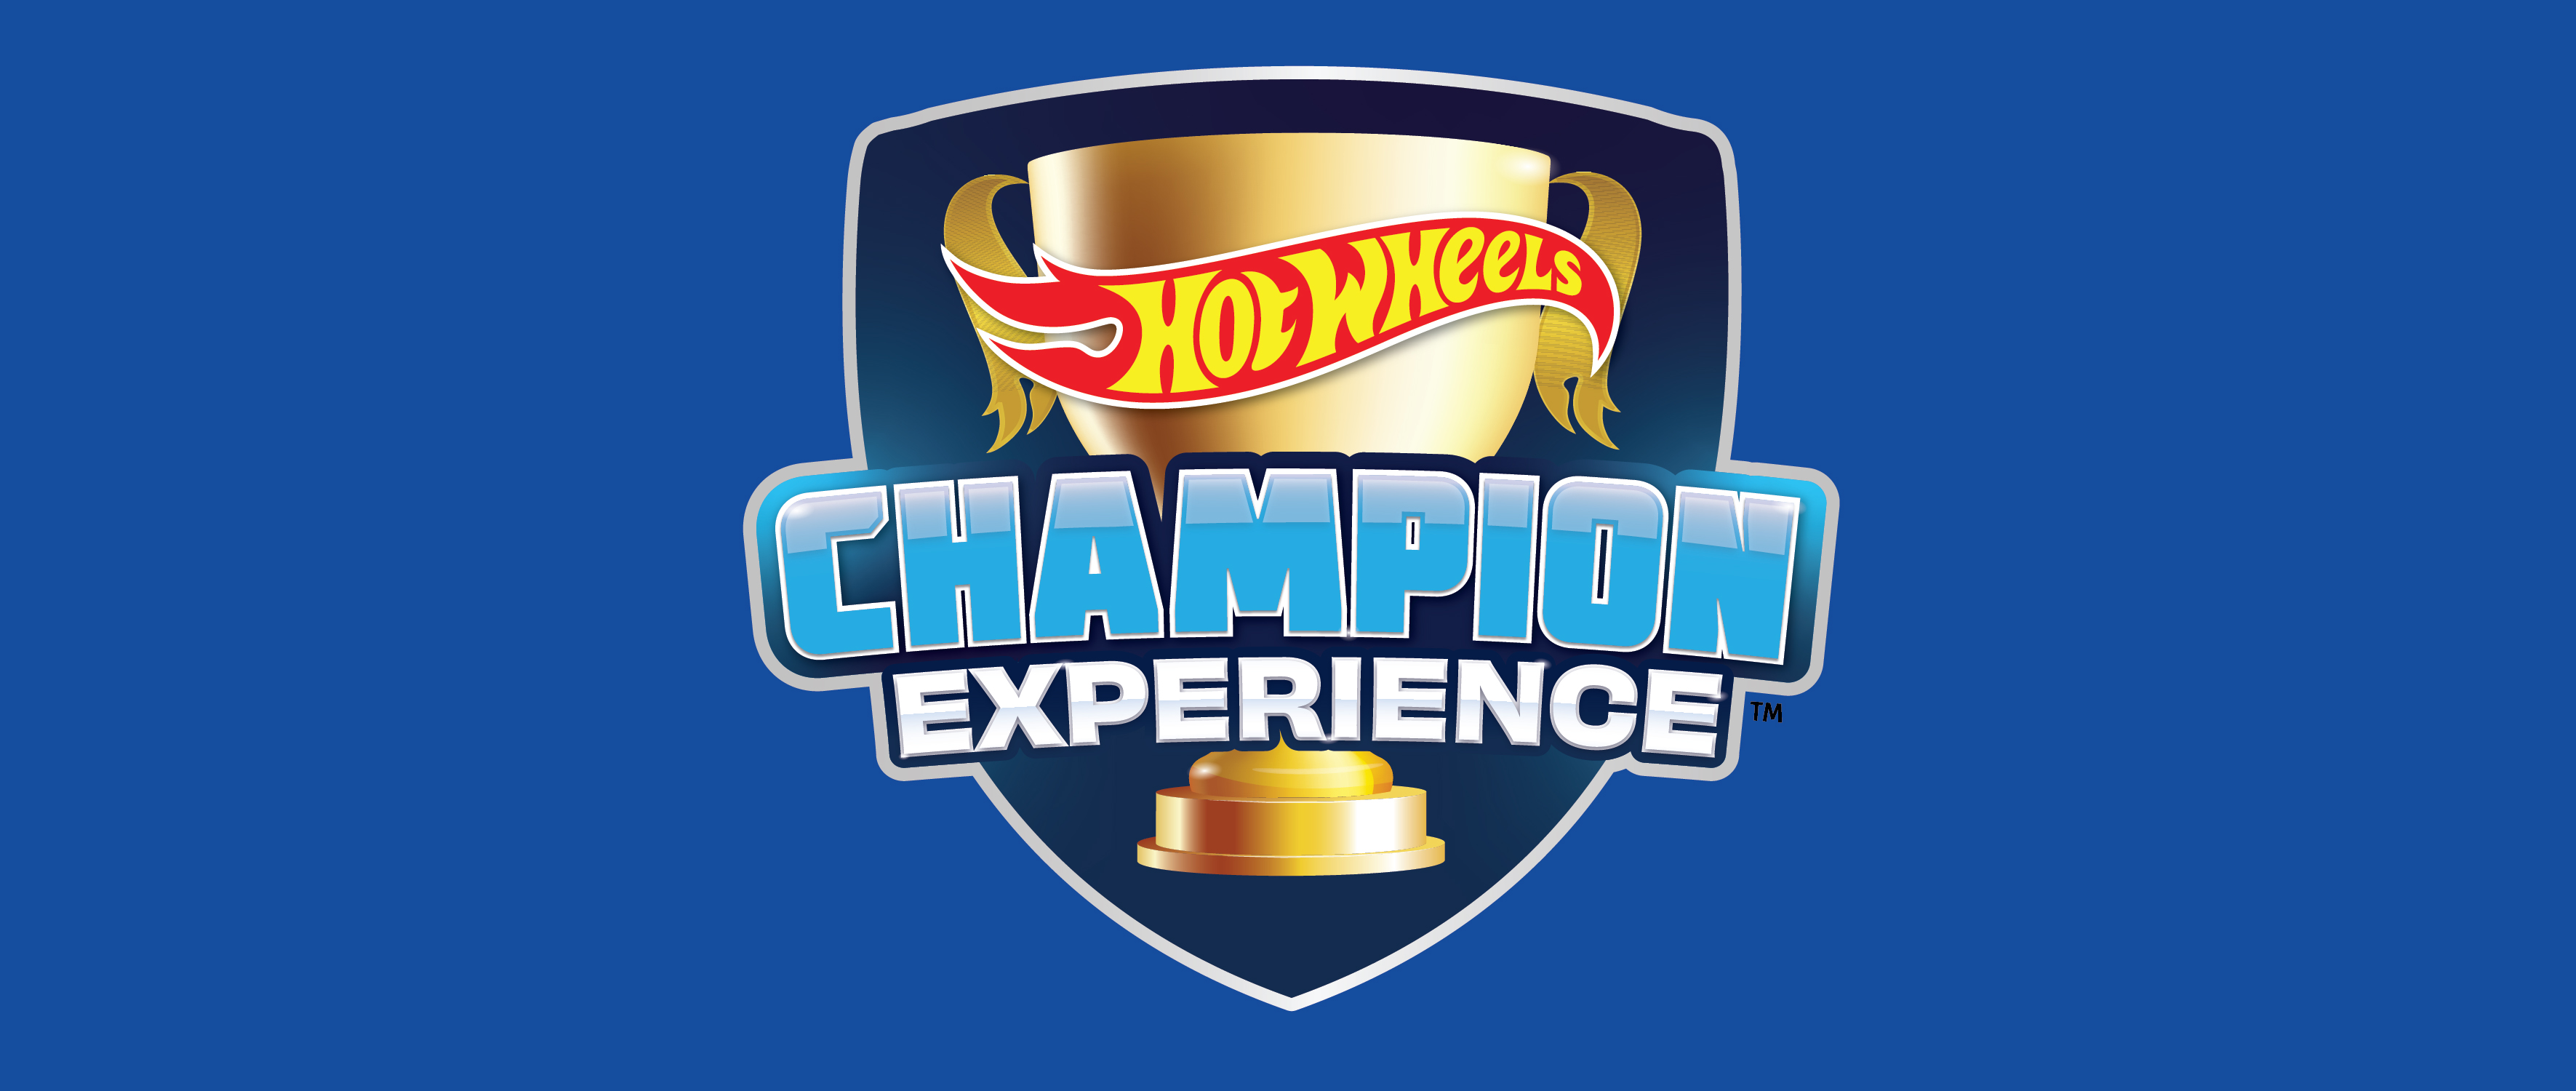 Entertainment-Hot Wheels Interactive Experience